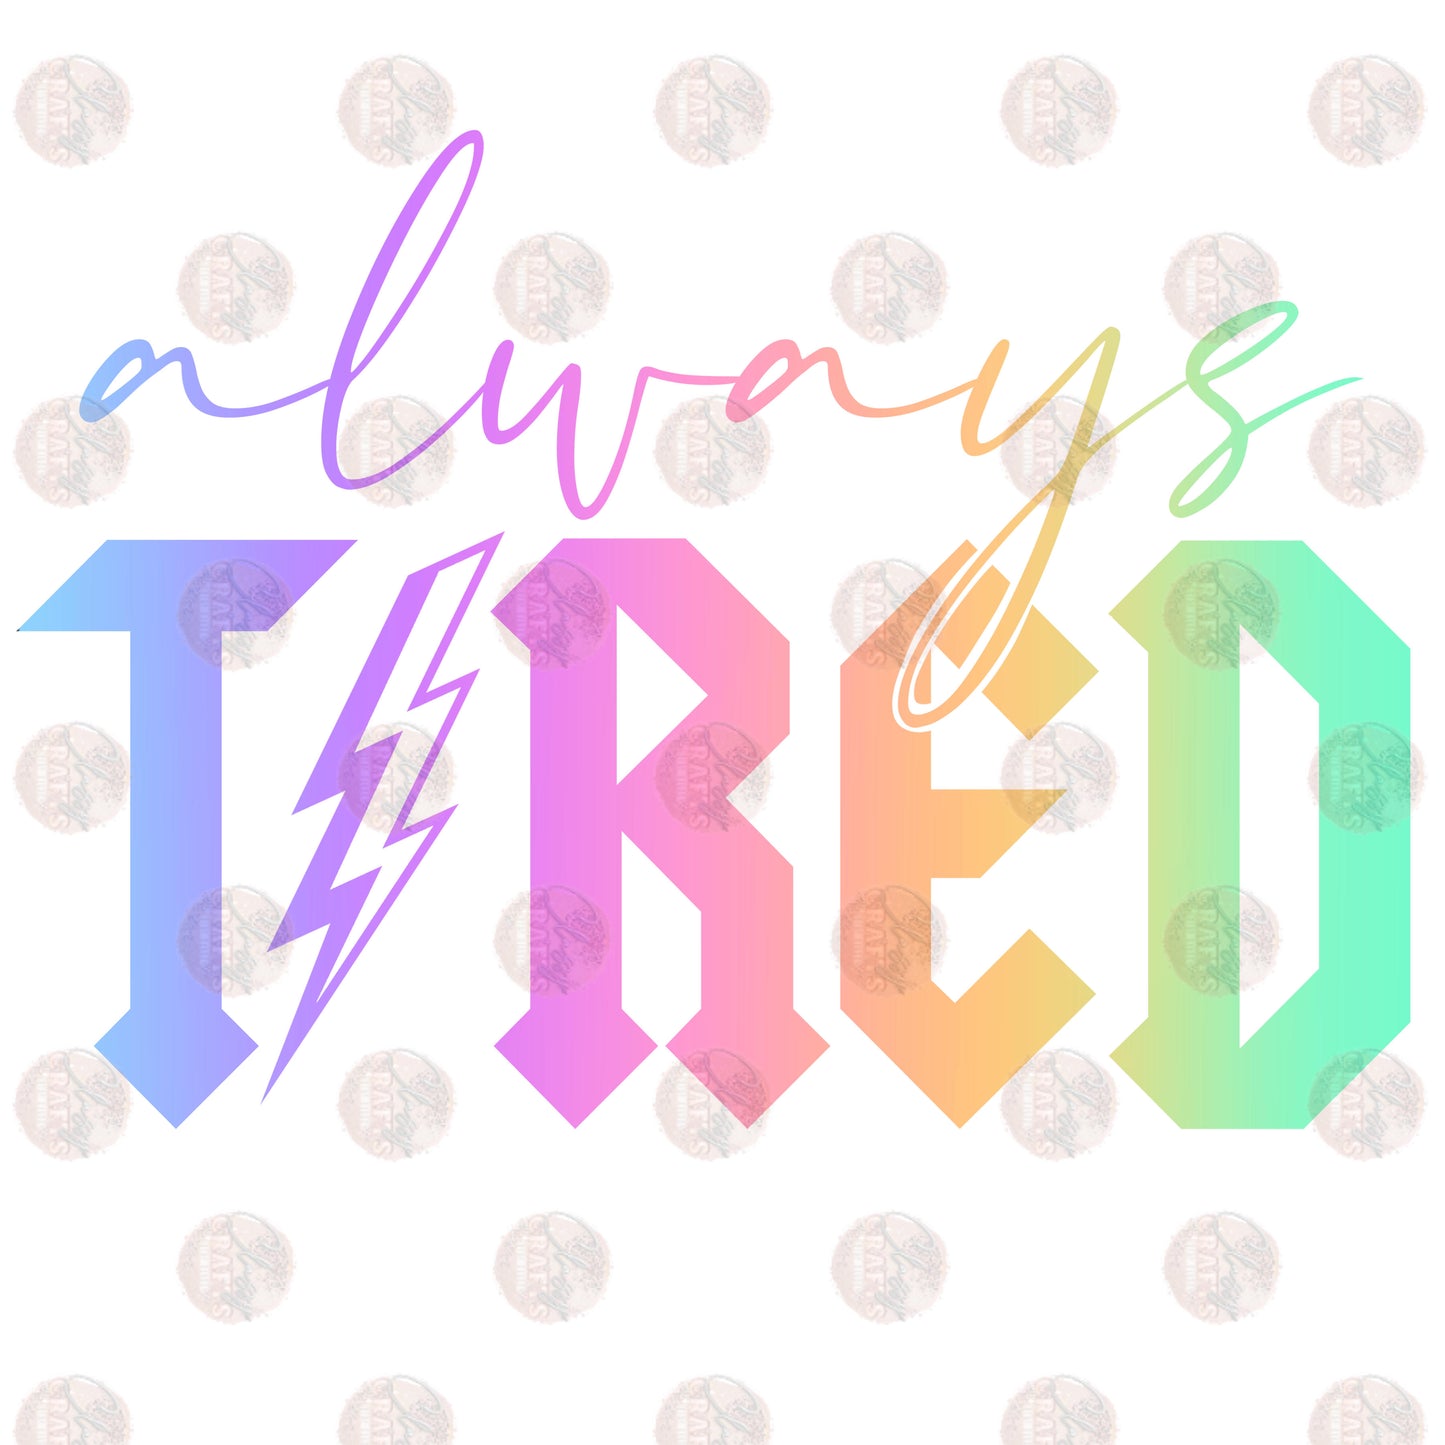 Always Tired - Sublimation Transfer